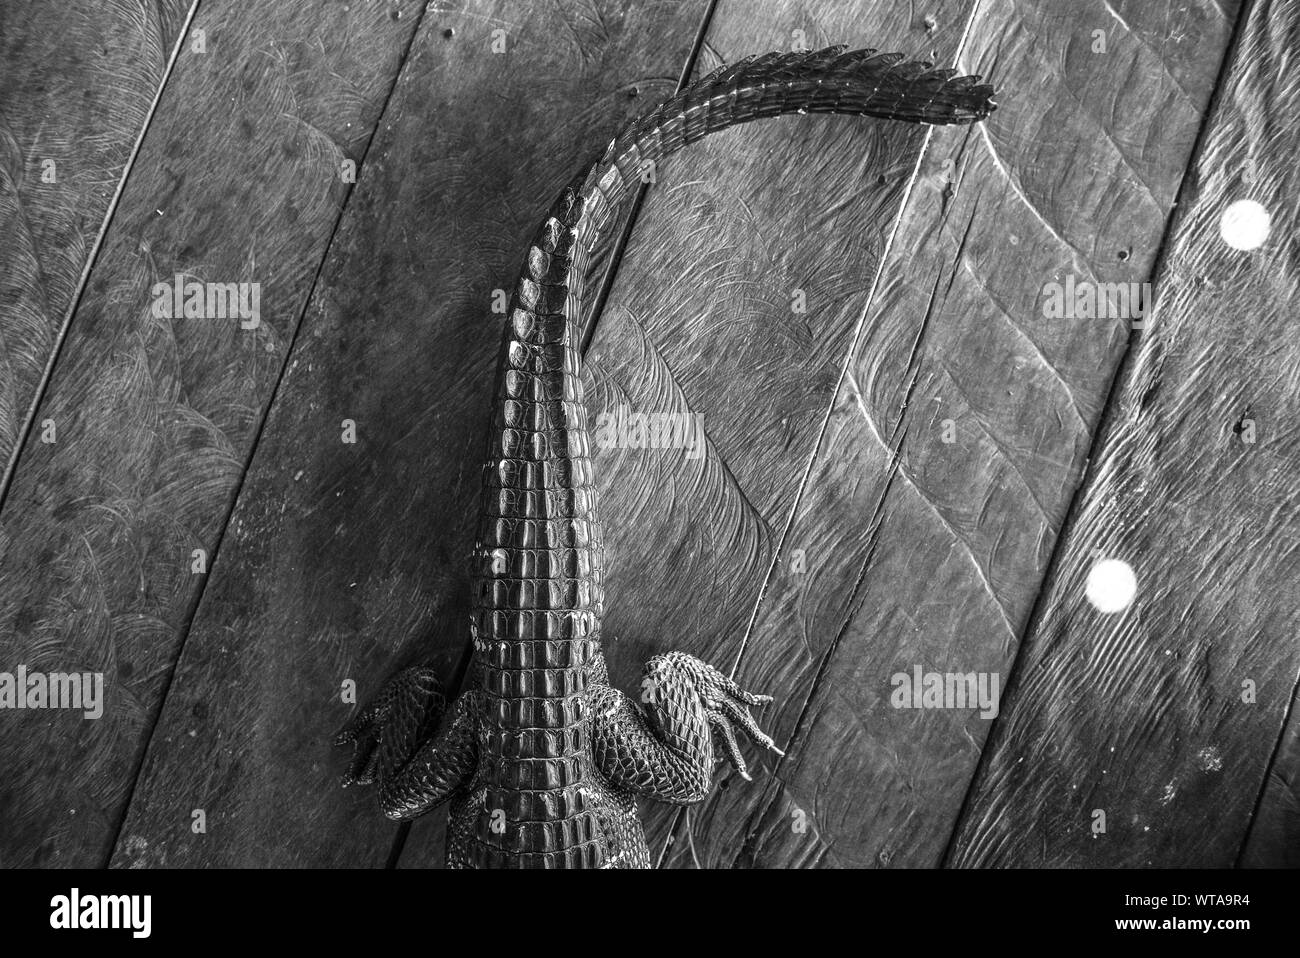 Alligator tail and wood background Stock Photo